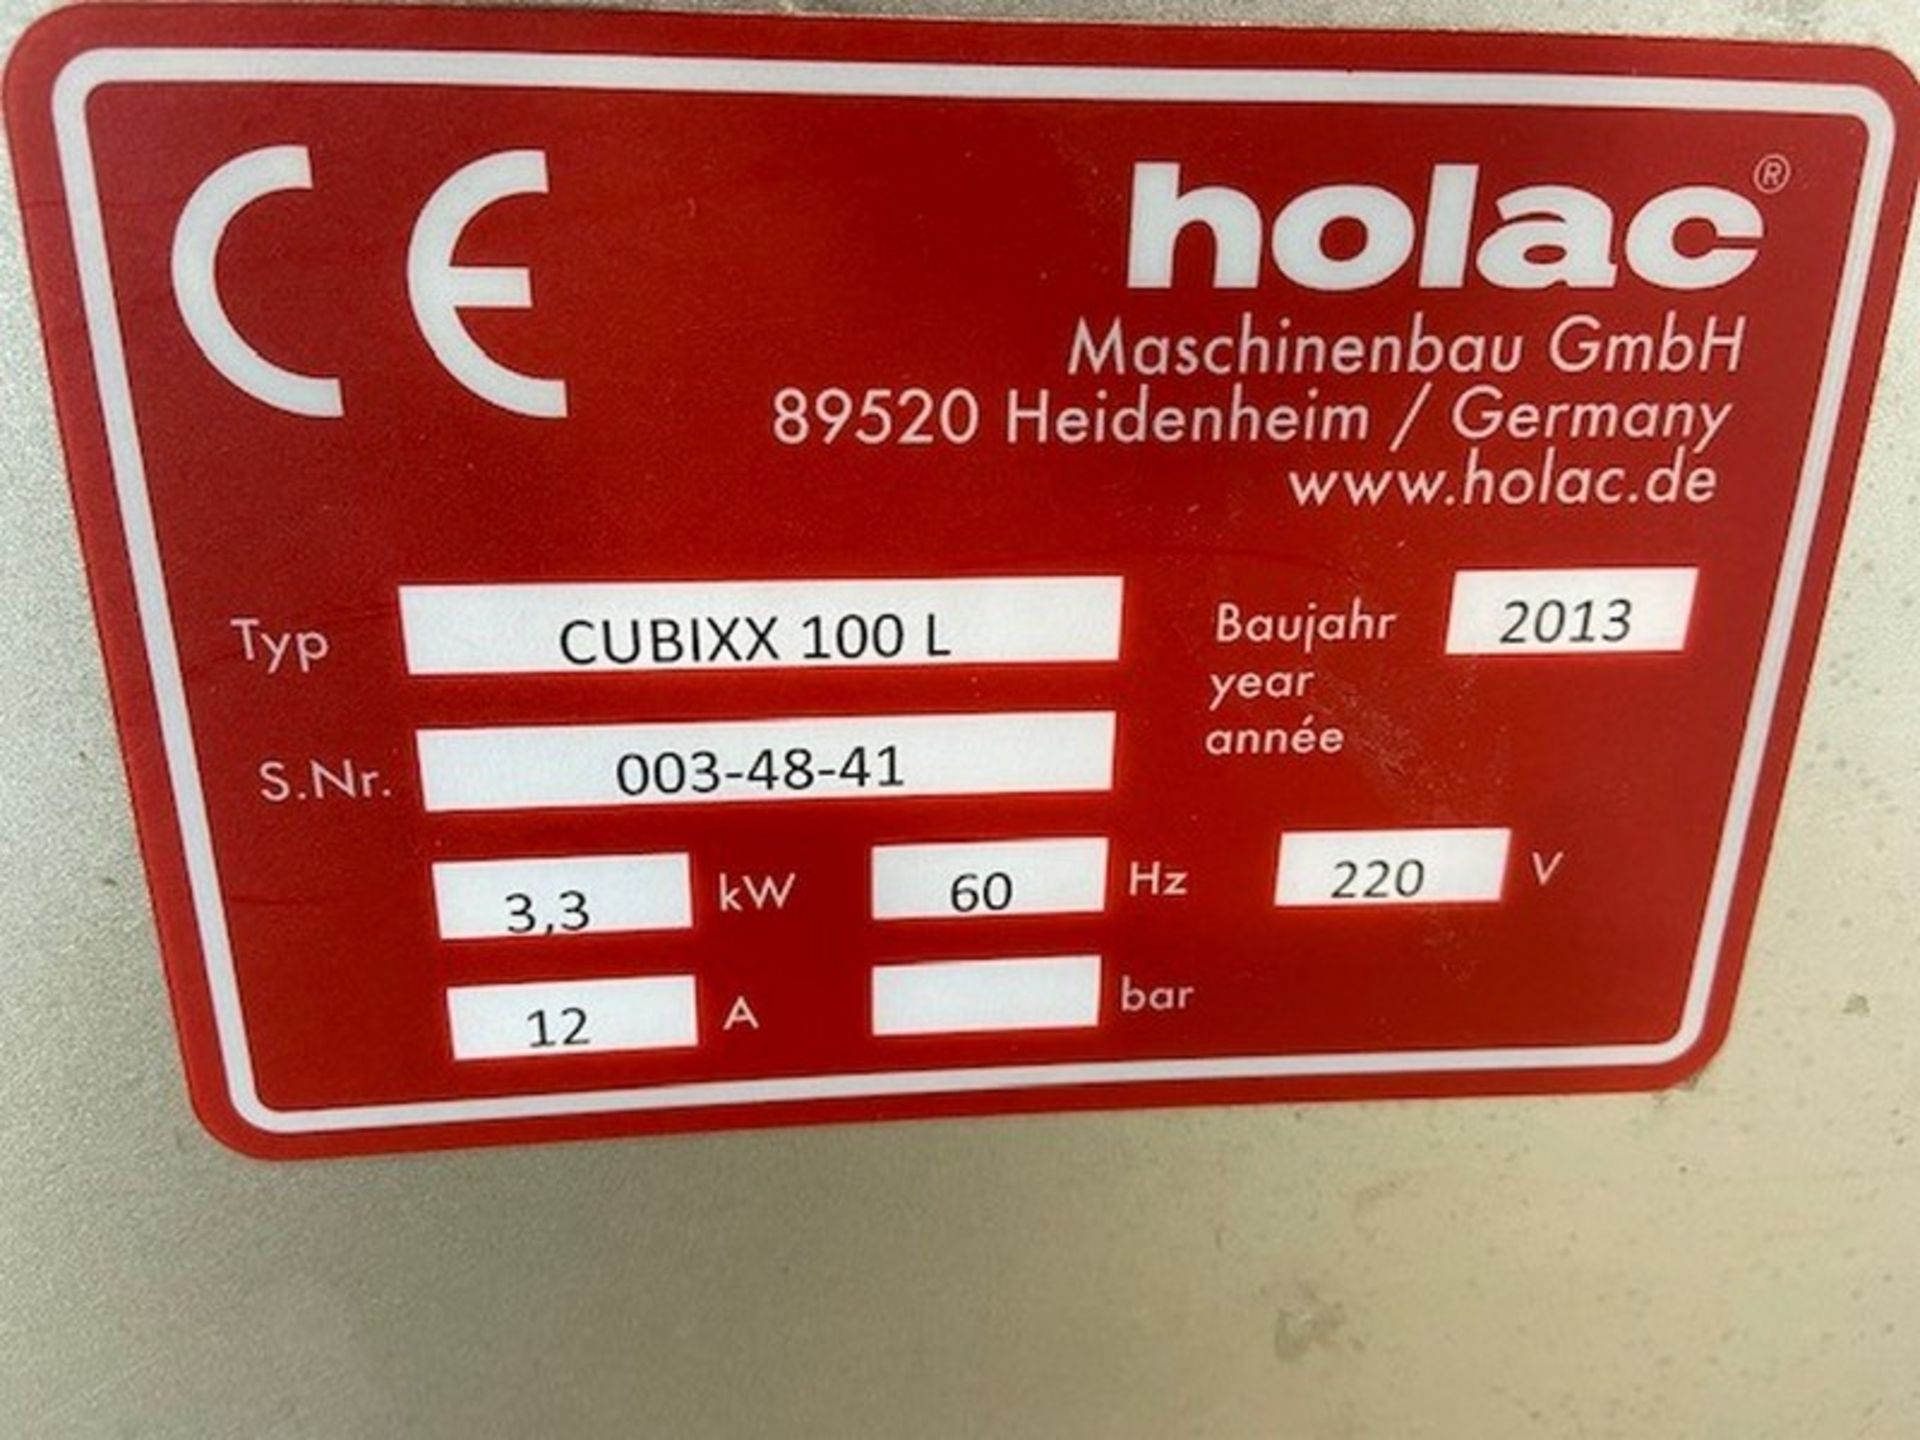 2013 Holac The Rounder, Type CUBIXX 100 L, S/N 003-48-41, 220 Volts, 3 Phase, with (2) Cutting - Image 2 of 8